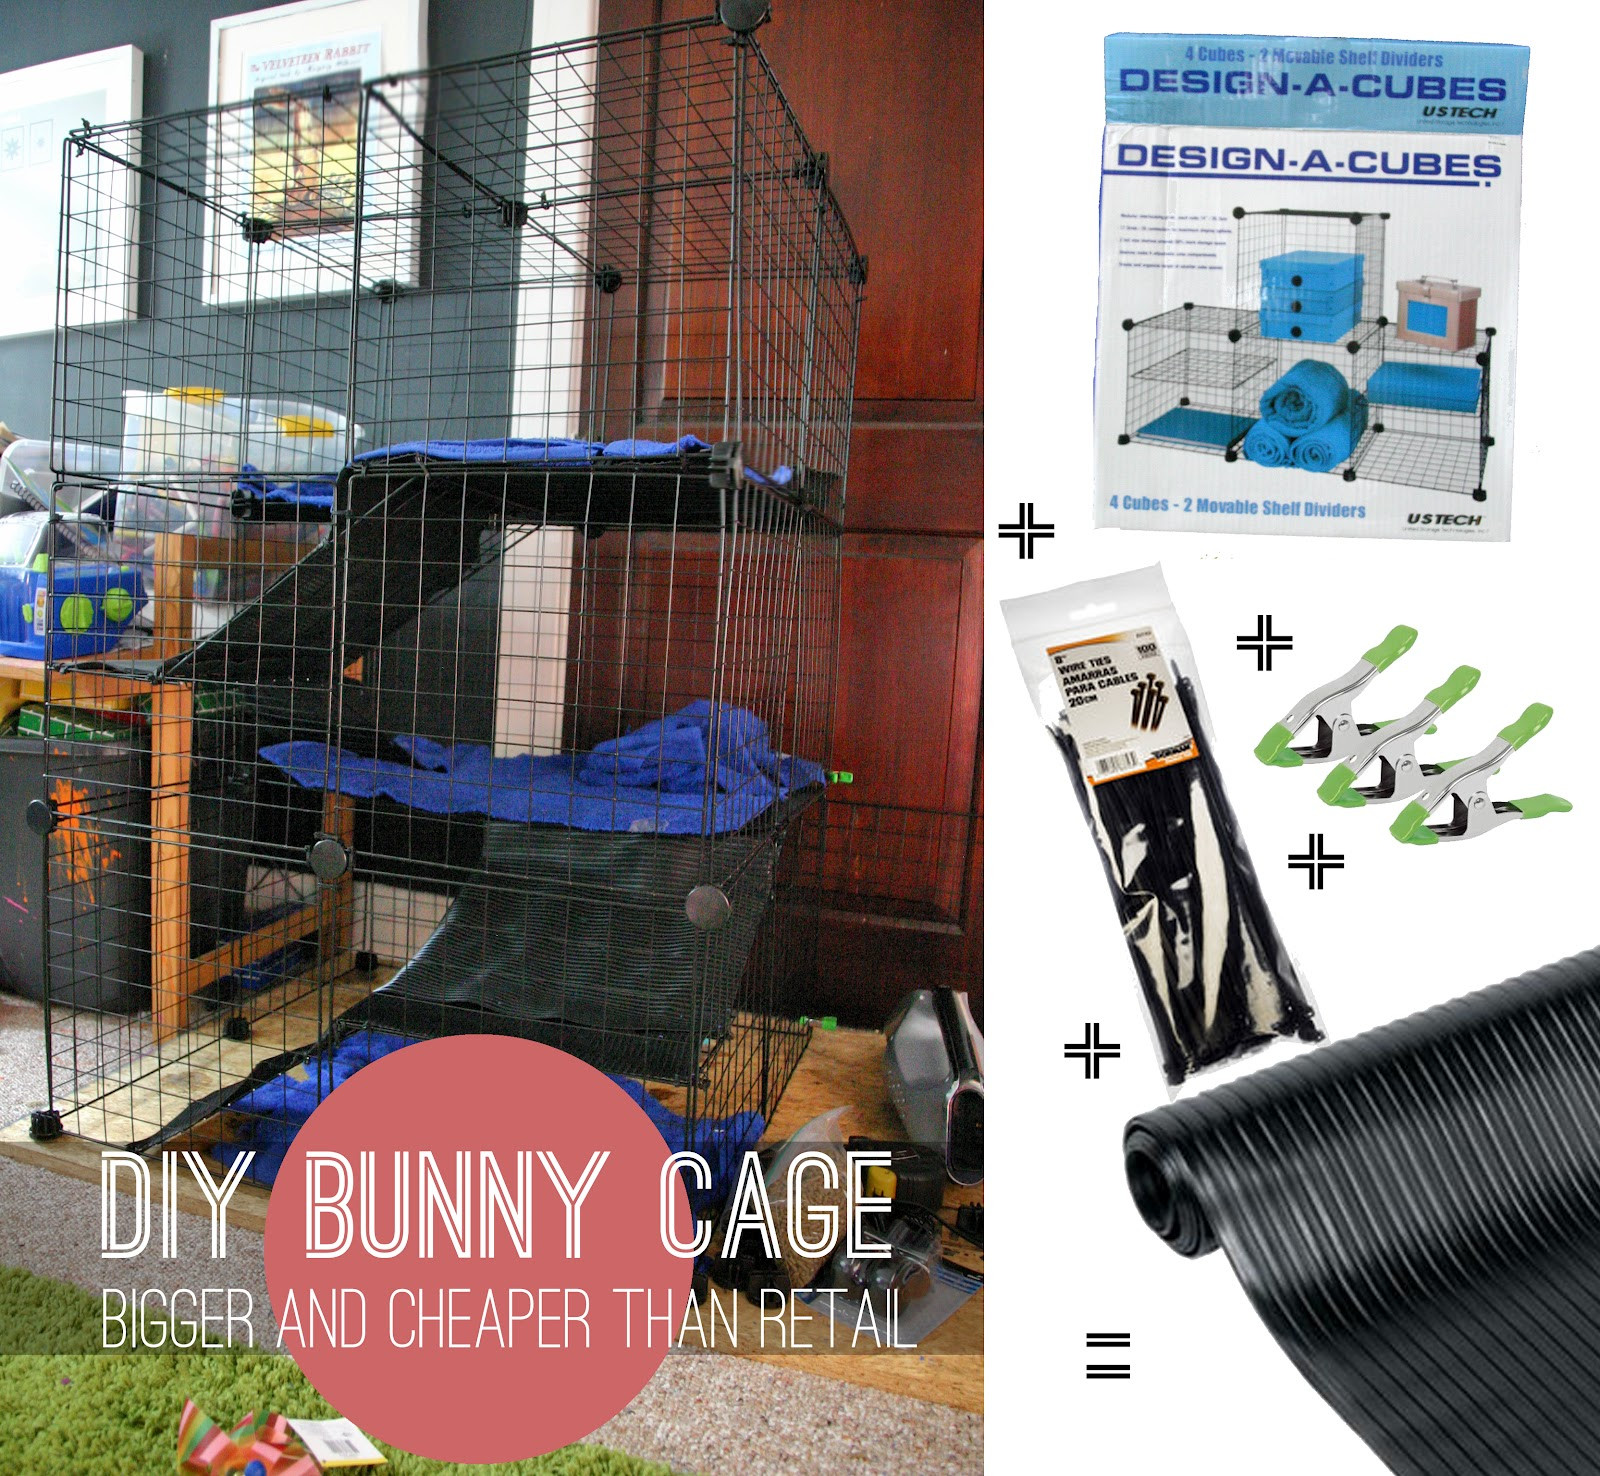 Best ideas about DIY Bunny Cage
. Save or Pin Grosgrain DIY Bunny Small Animal Cage Bigger and Now.